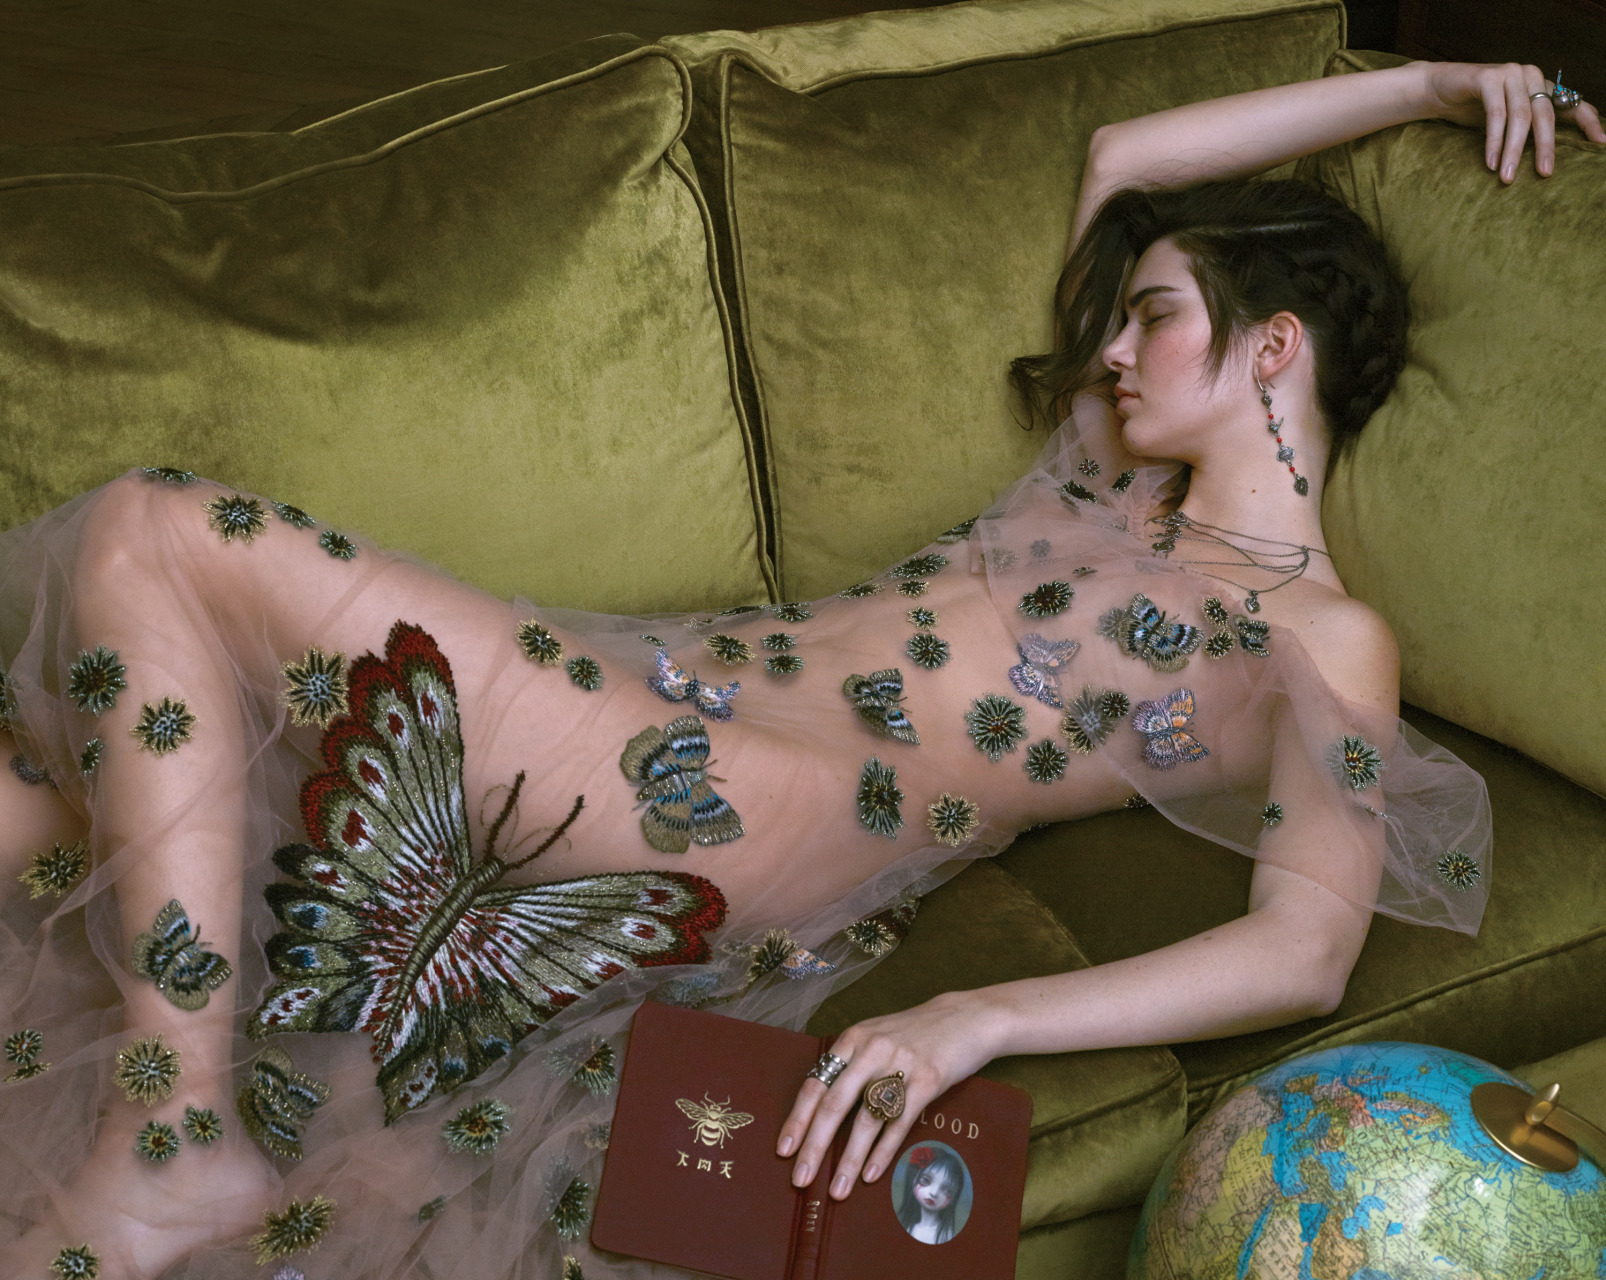 People 1606x1280 lying on couch butterfly transparency see-through clothing legs model see-through dress closed eyes lying down lying on back dark hair rings couch globes belly dress green couch photography long earrings makeup fashion butterfly wings women Kendall Jenner